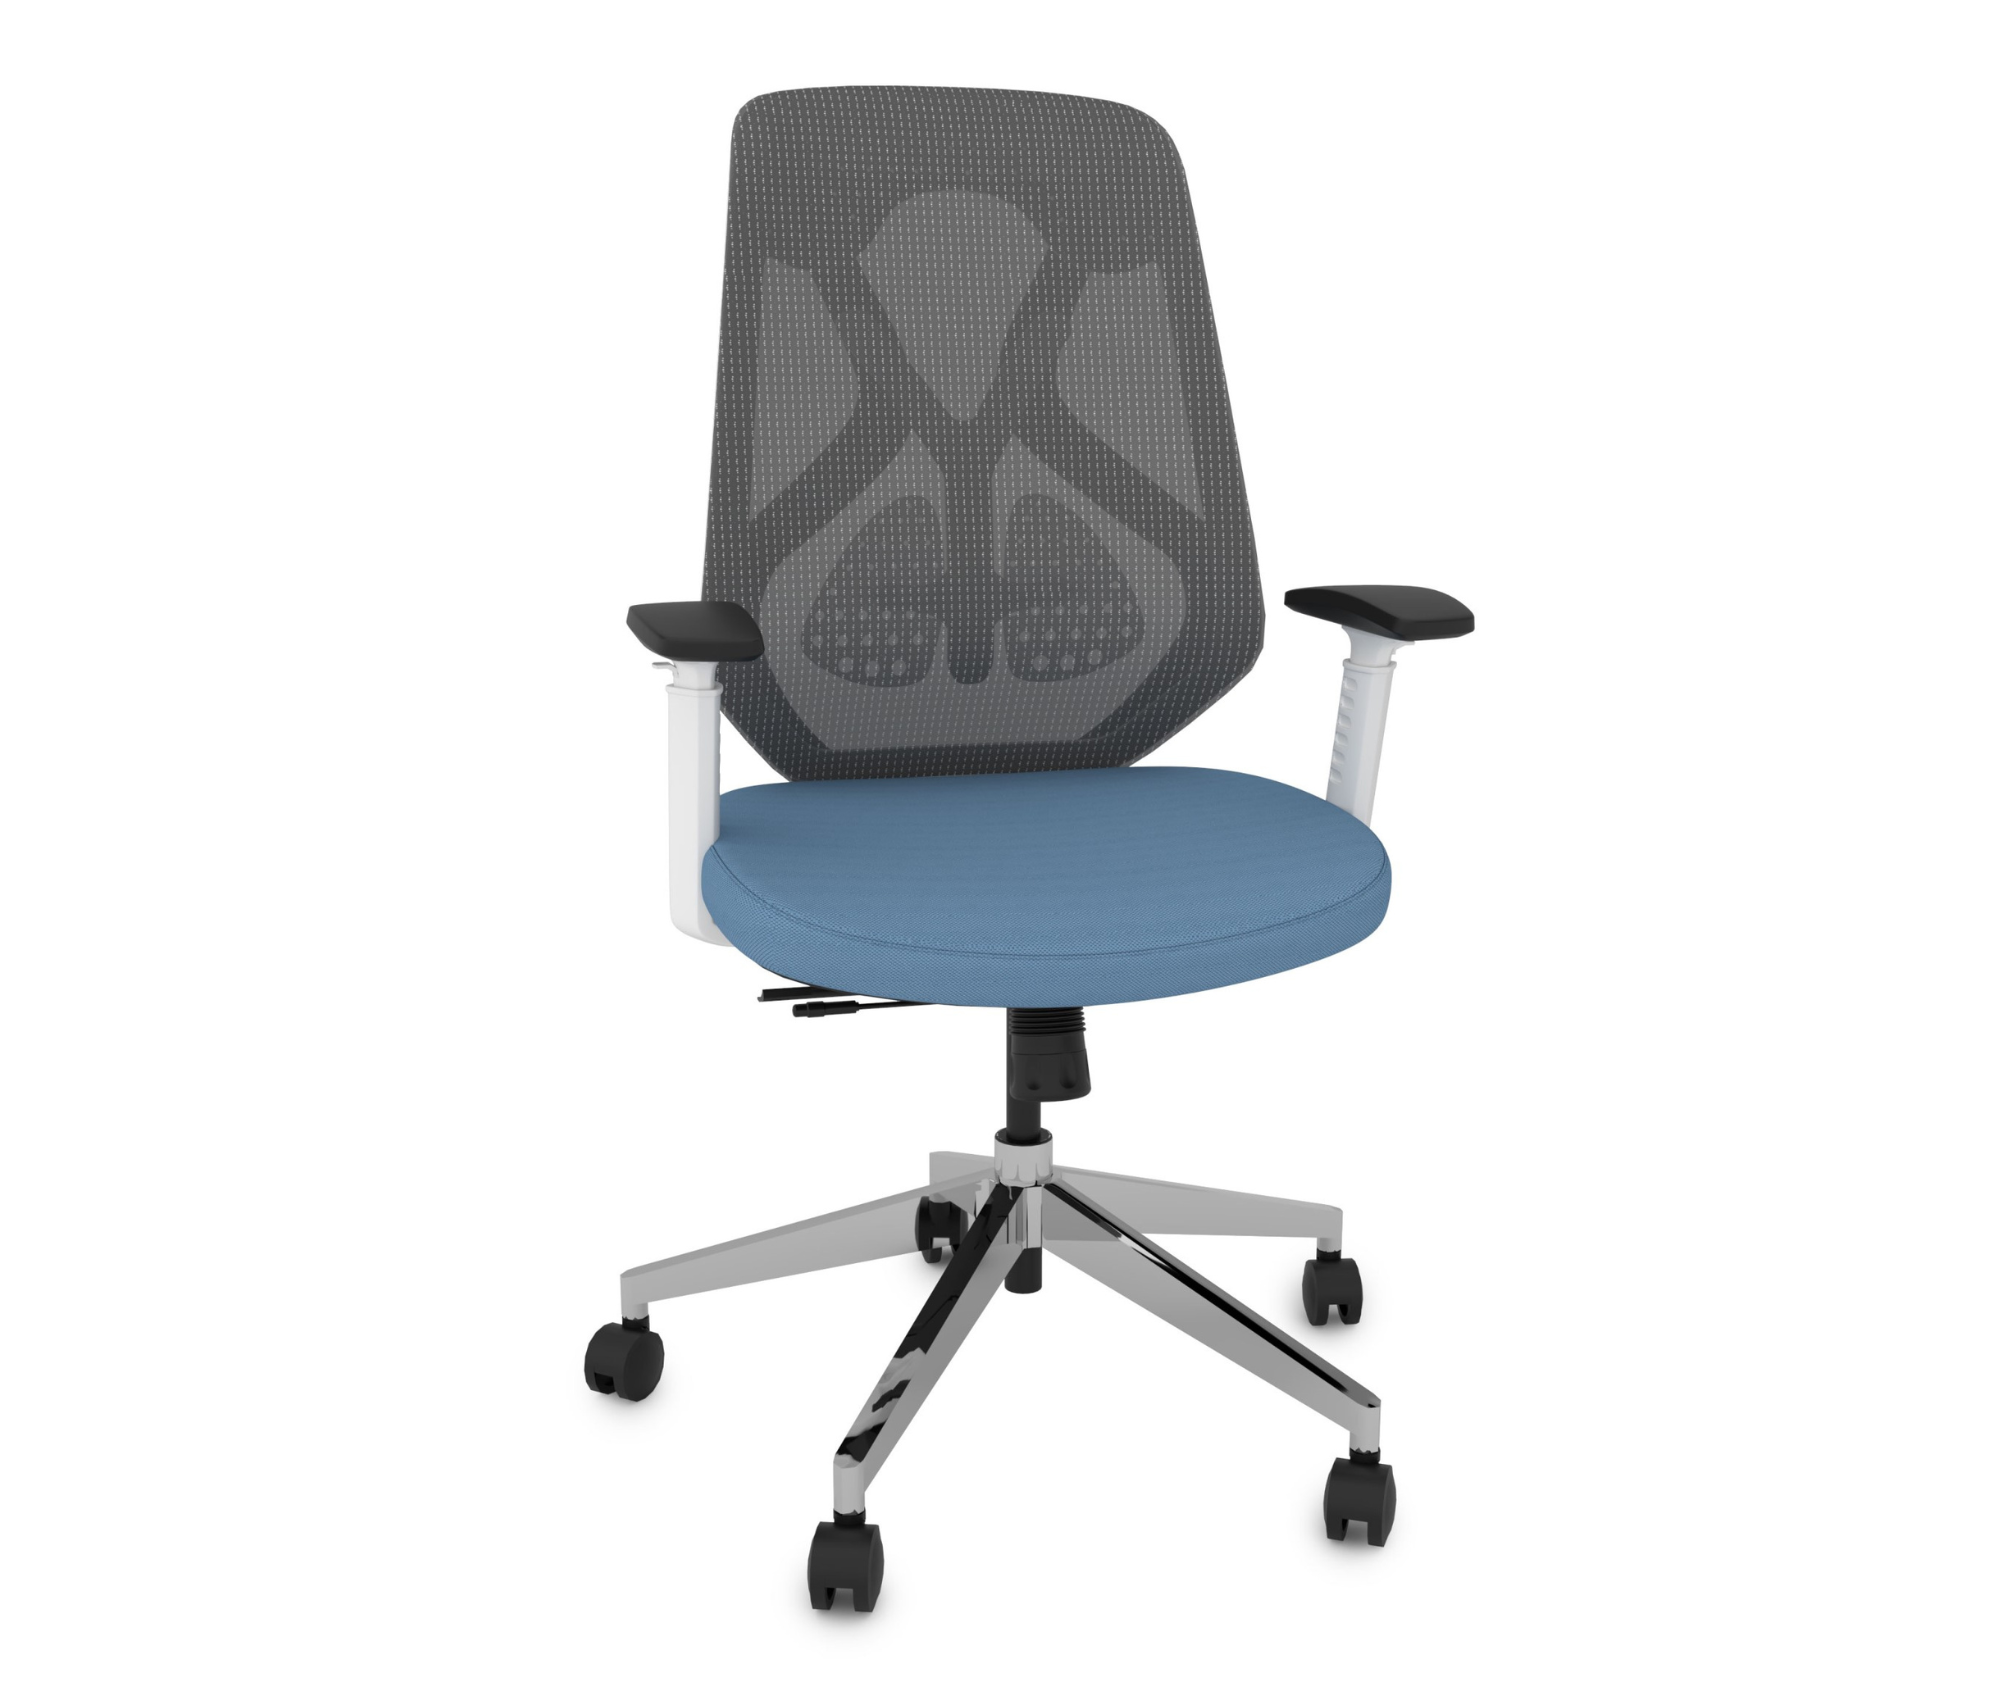  OLYDON Back Support Office Chair - Posture Correction